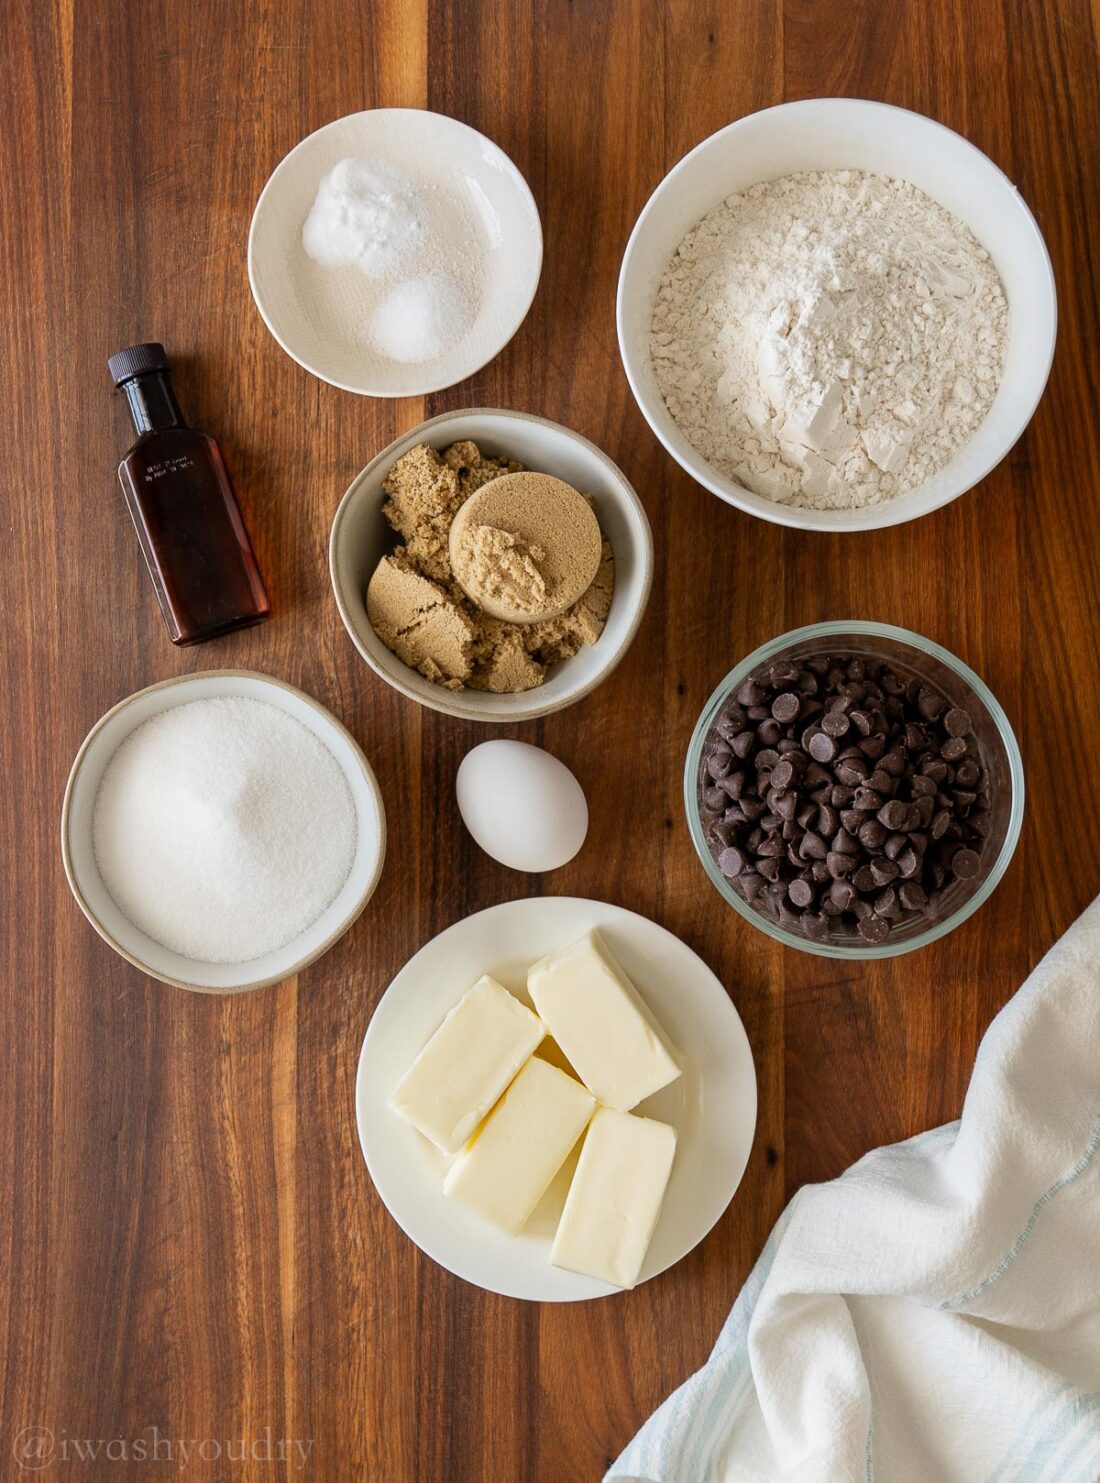 ingredients for chocolate chip cookies on wooden surface.